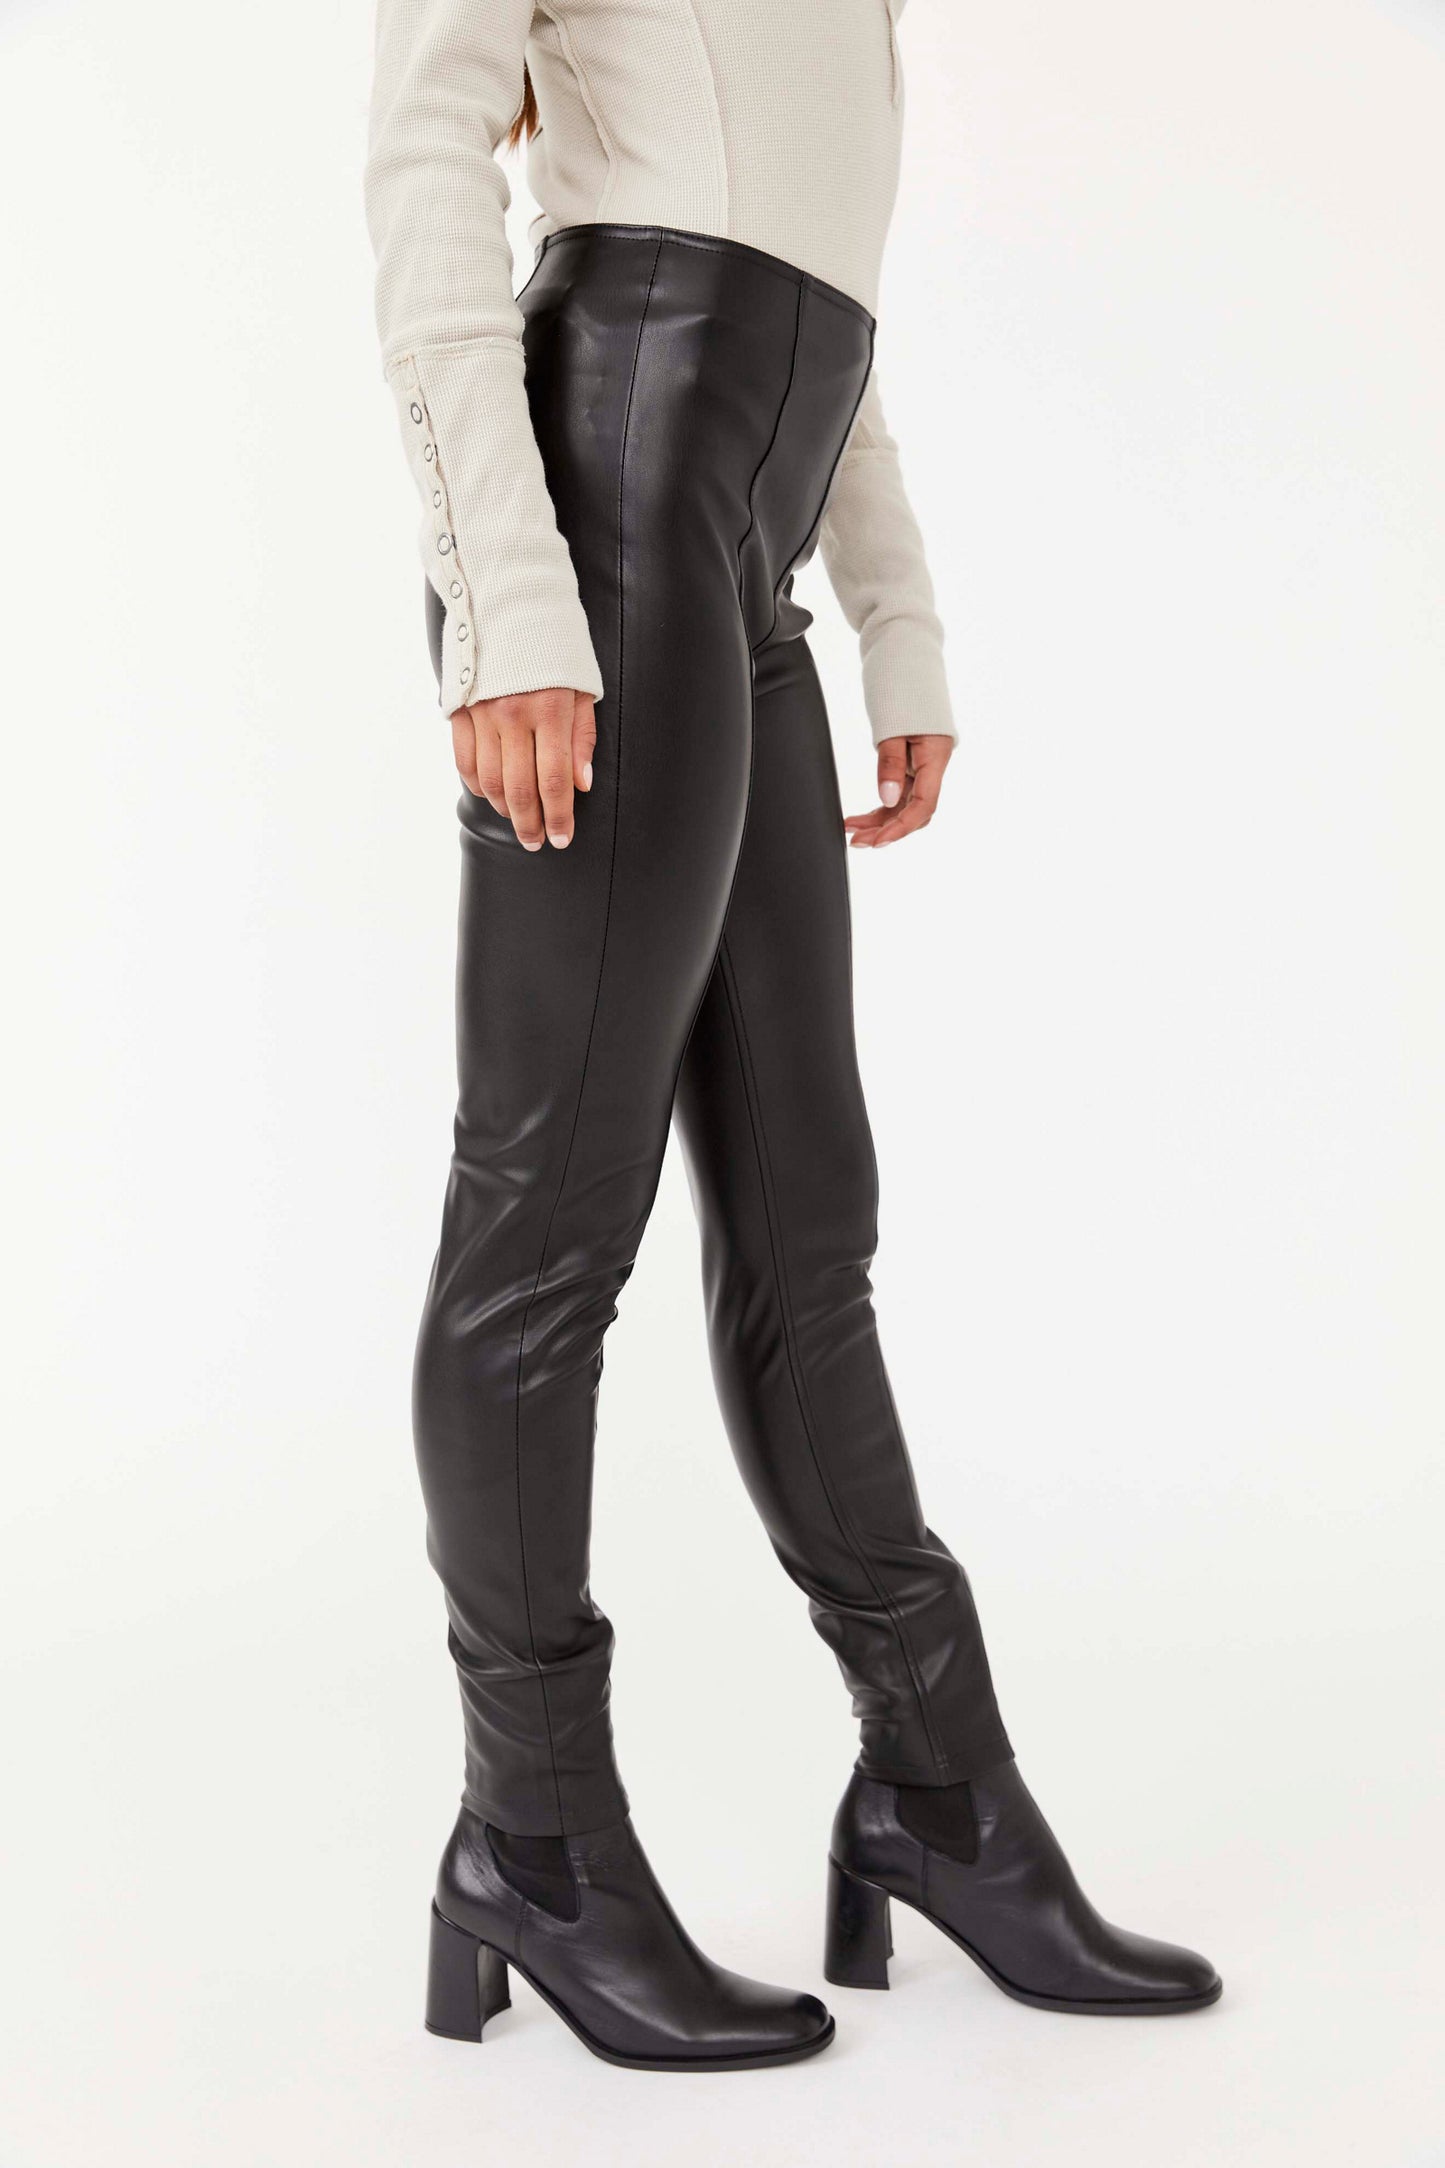 Spitfire Stacked Skinny Pants Free People 